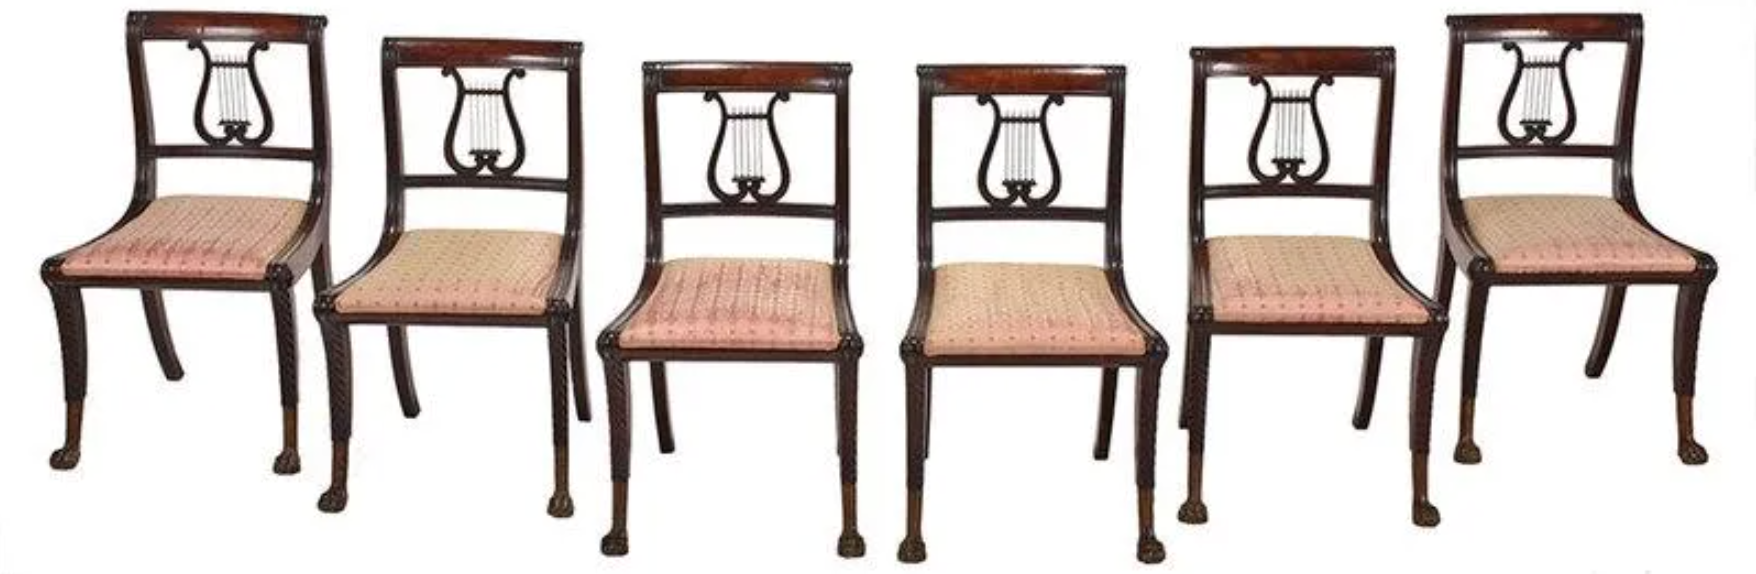 A circa-1815 set of six lyre-back Klismos chairs attributed to Duncan Phyfe realized $60,000 plus the buyer’s premium in September 2020. Image courtesy of Brunk Auctions and LiveAuctioneers.